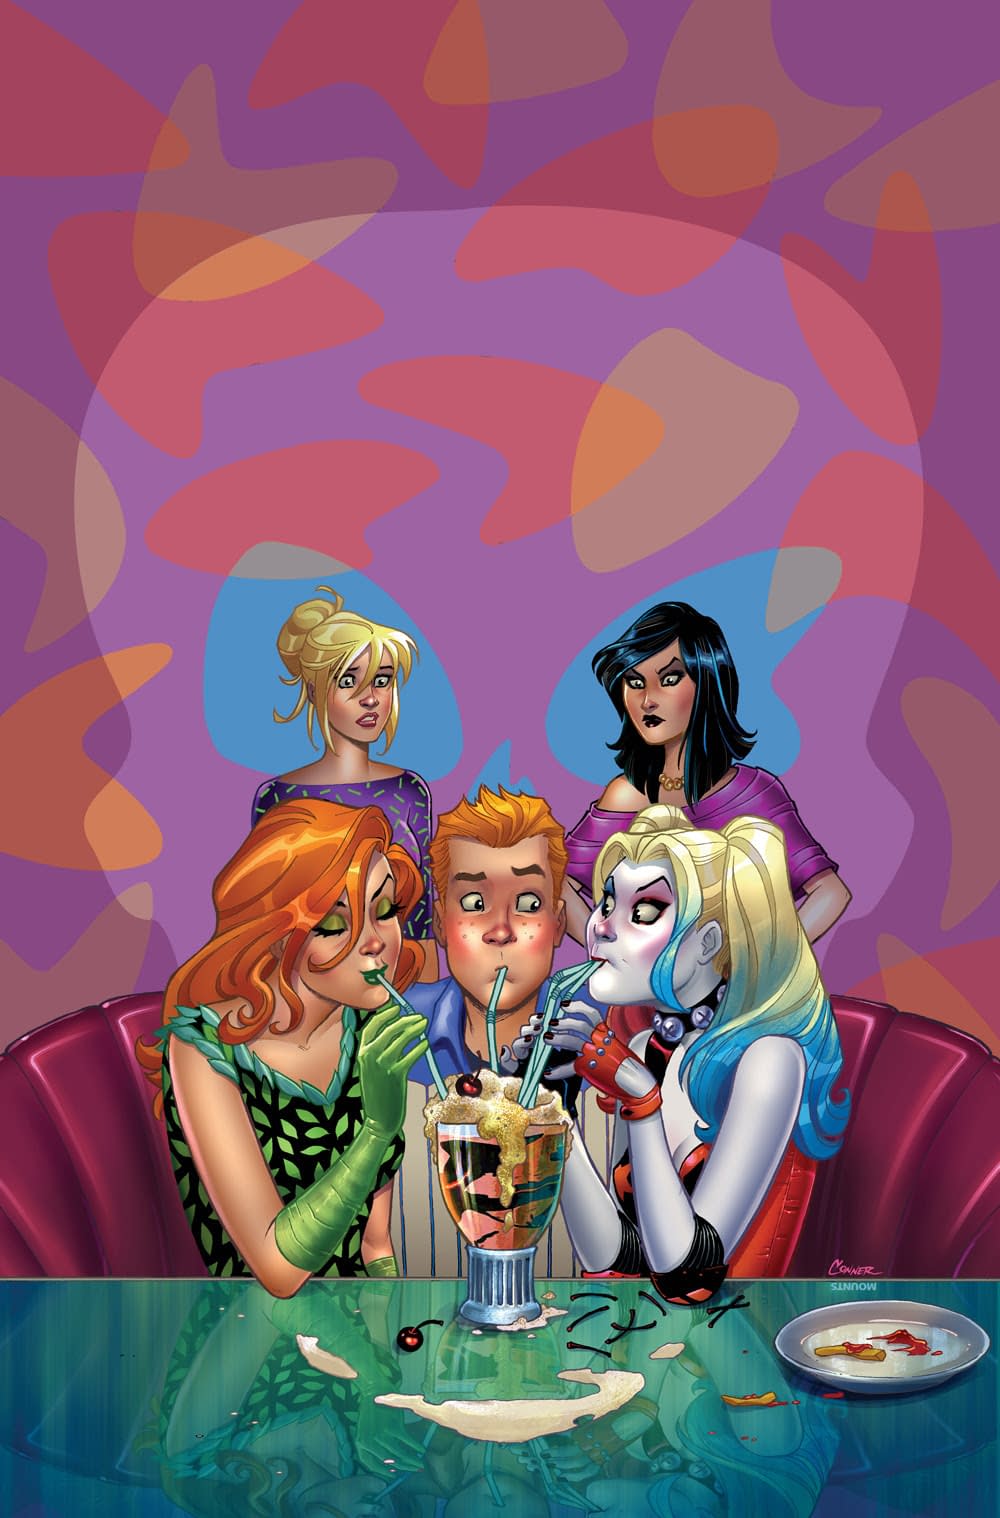 Harley &#038; Ivy Meet Betty &#038; Veronica In DC/Archie Crossover By Paul Dini, Marc Andreyko, and Laura Braga